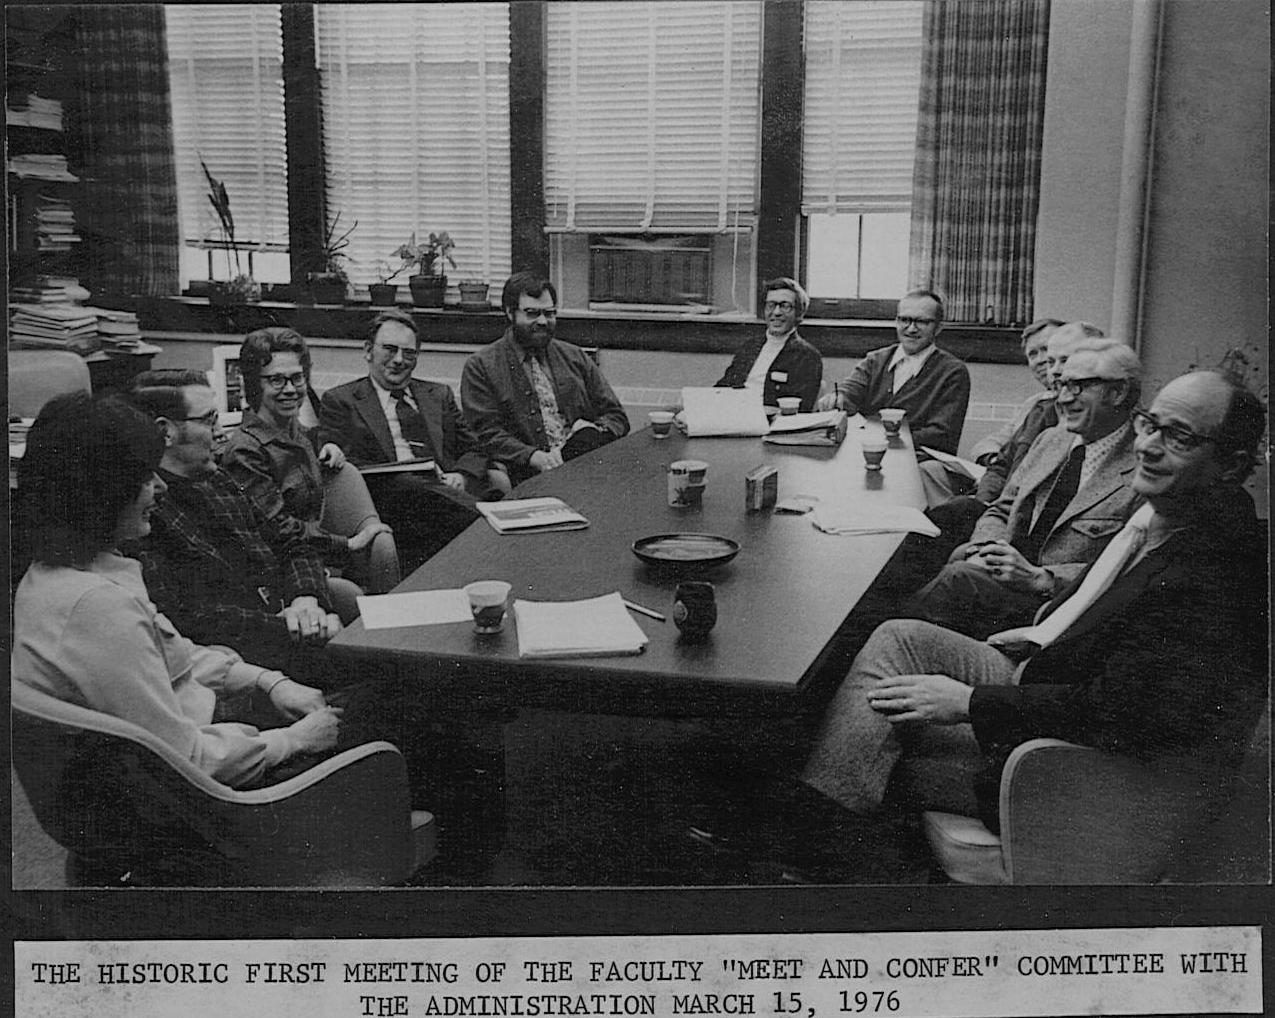 Historic first meeting of the faculty "Meet and Confer" committee with the administrations, March 15, 1976.